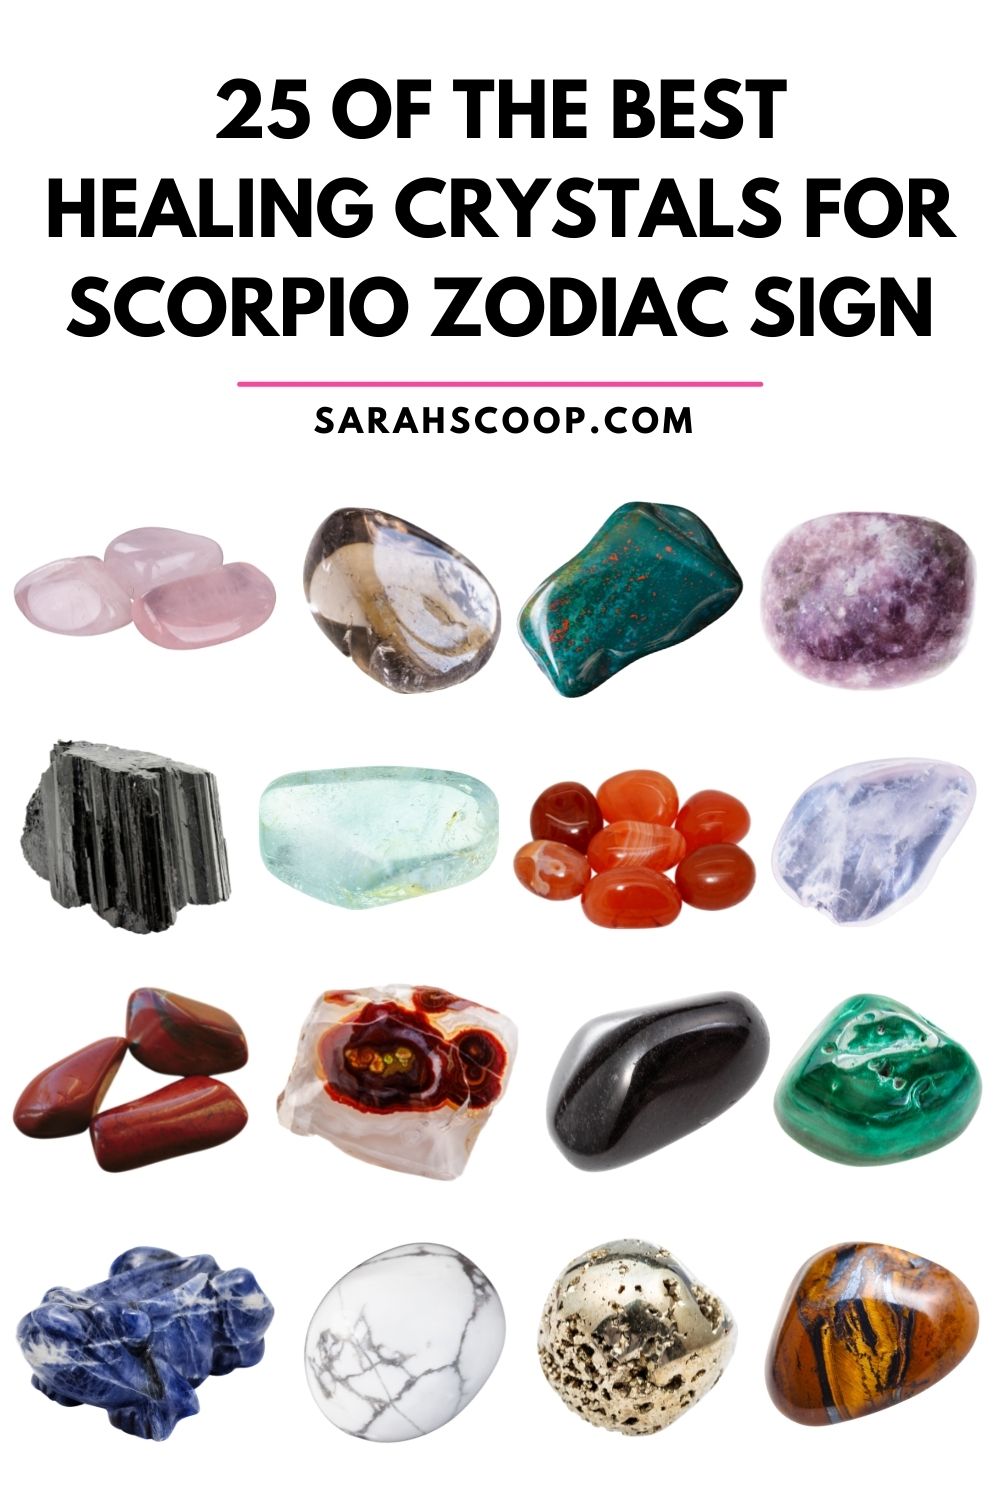 Scorpio Zodiac Bundle 16pc Quality Handpicked Healing Crystals for an Open Mind 